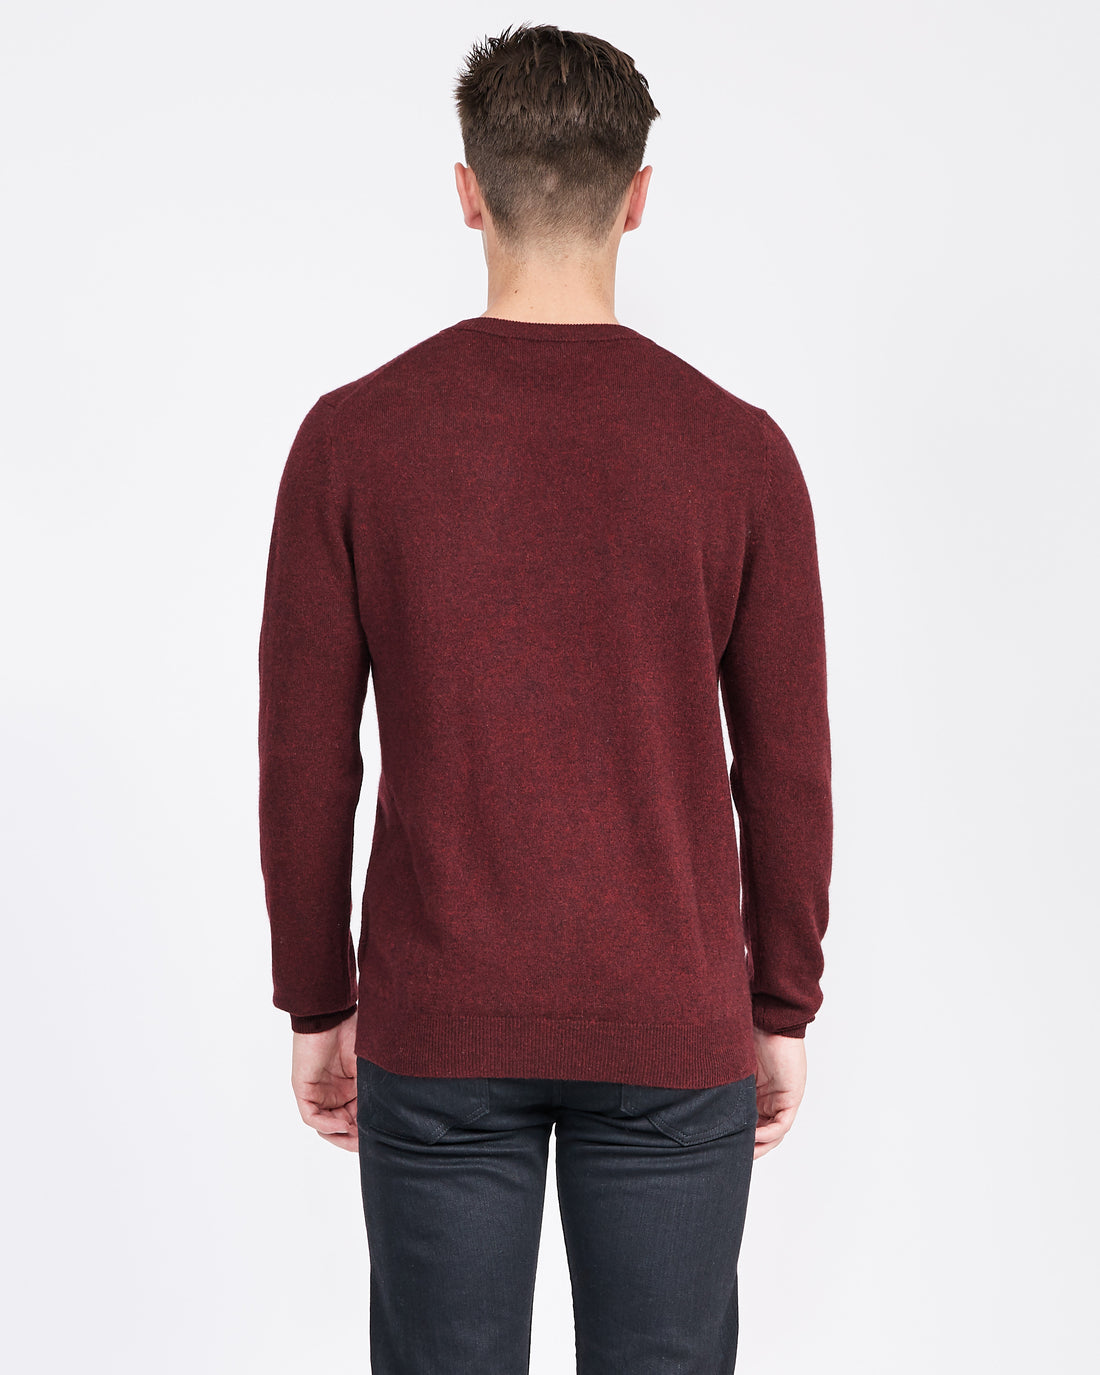 Personalized Cashmere Crew for Him